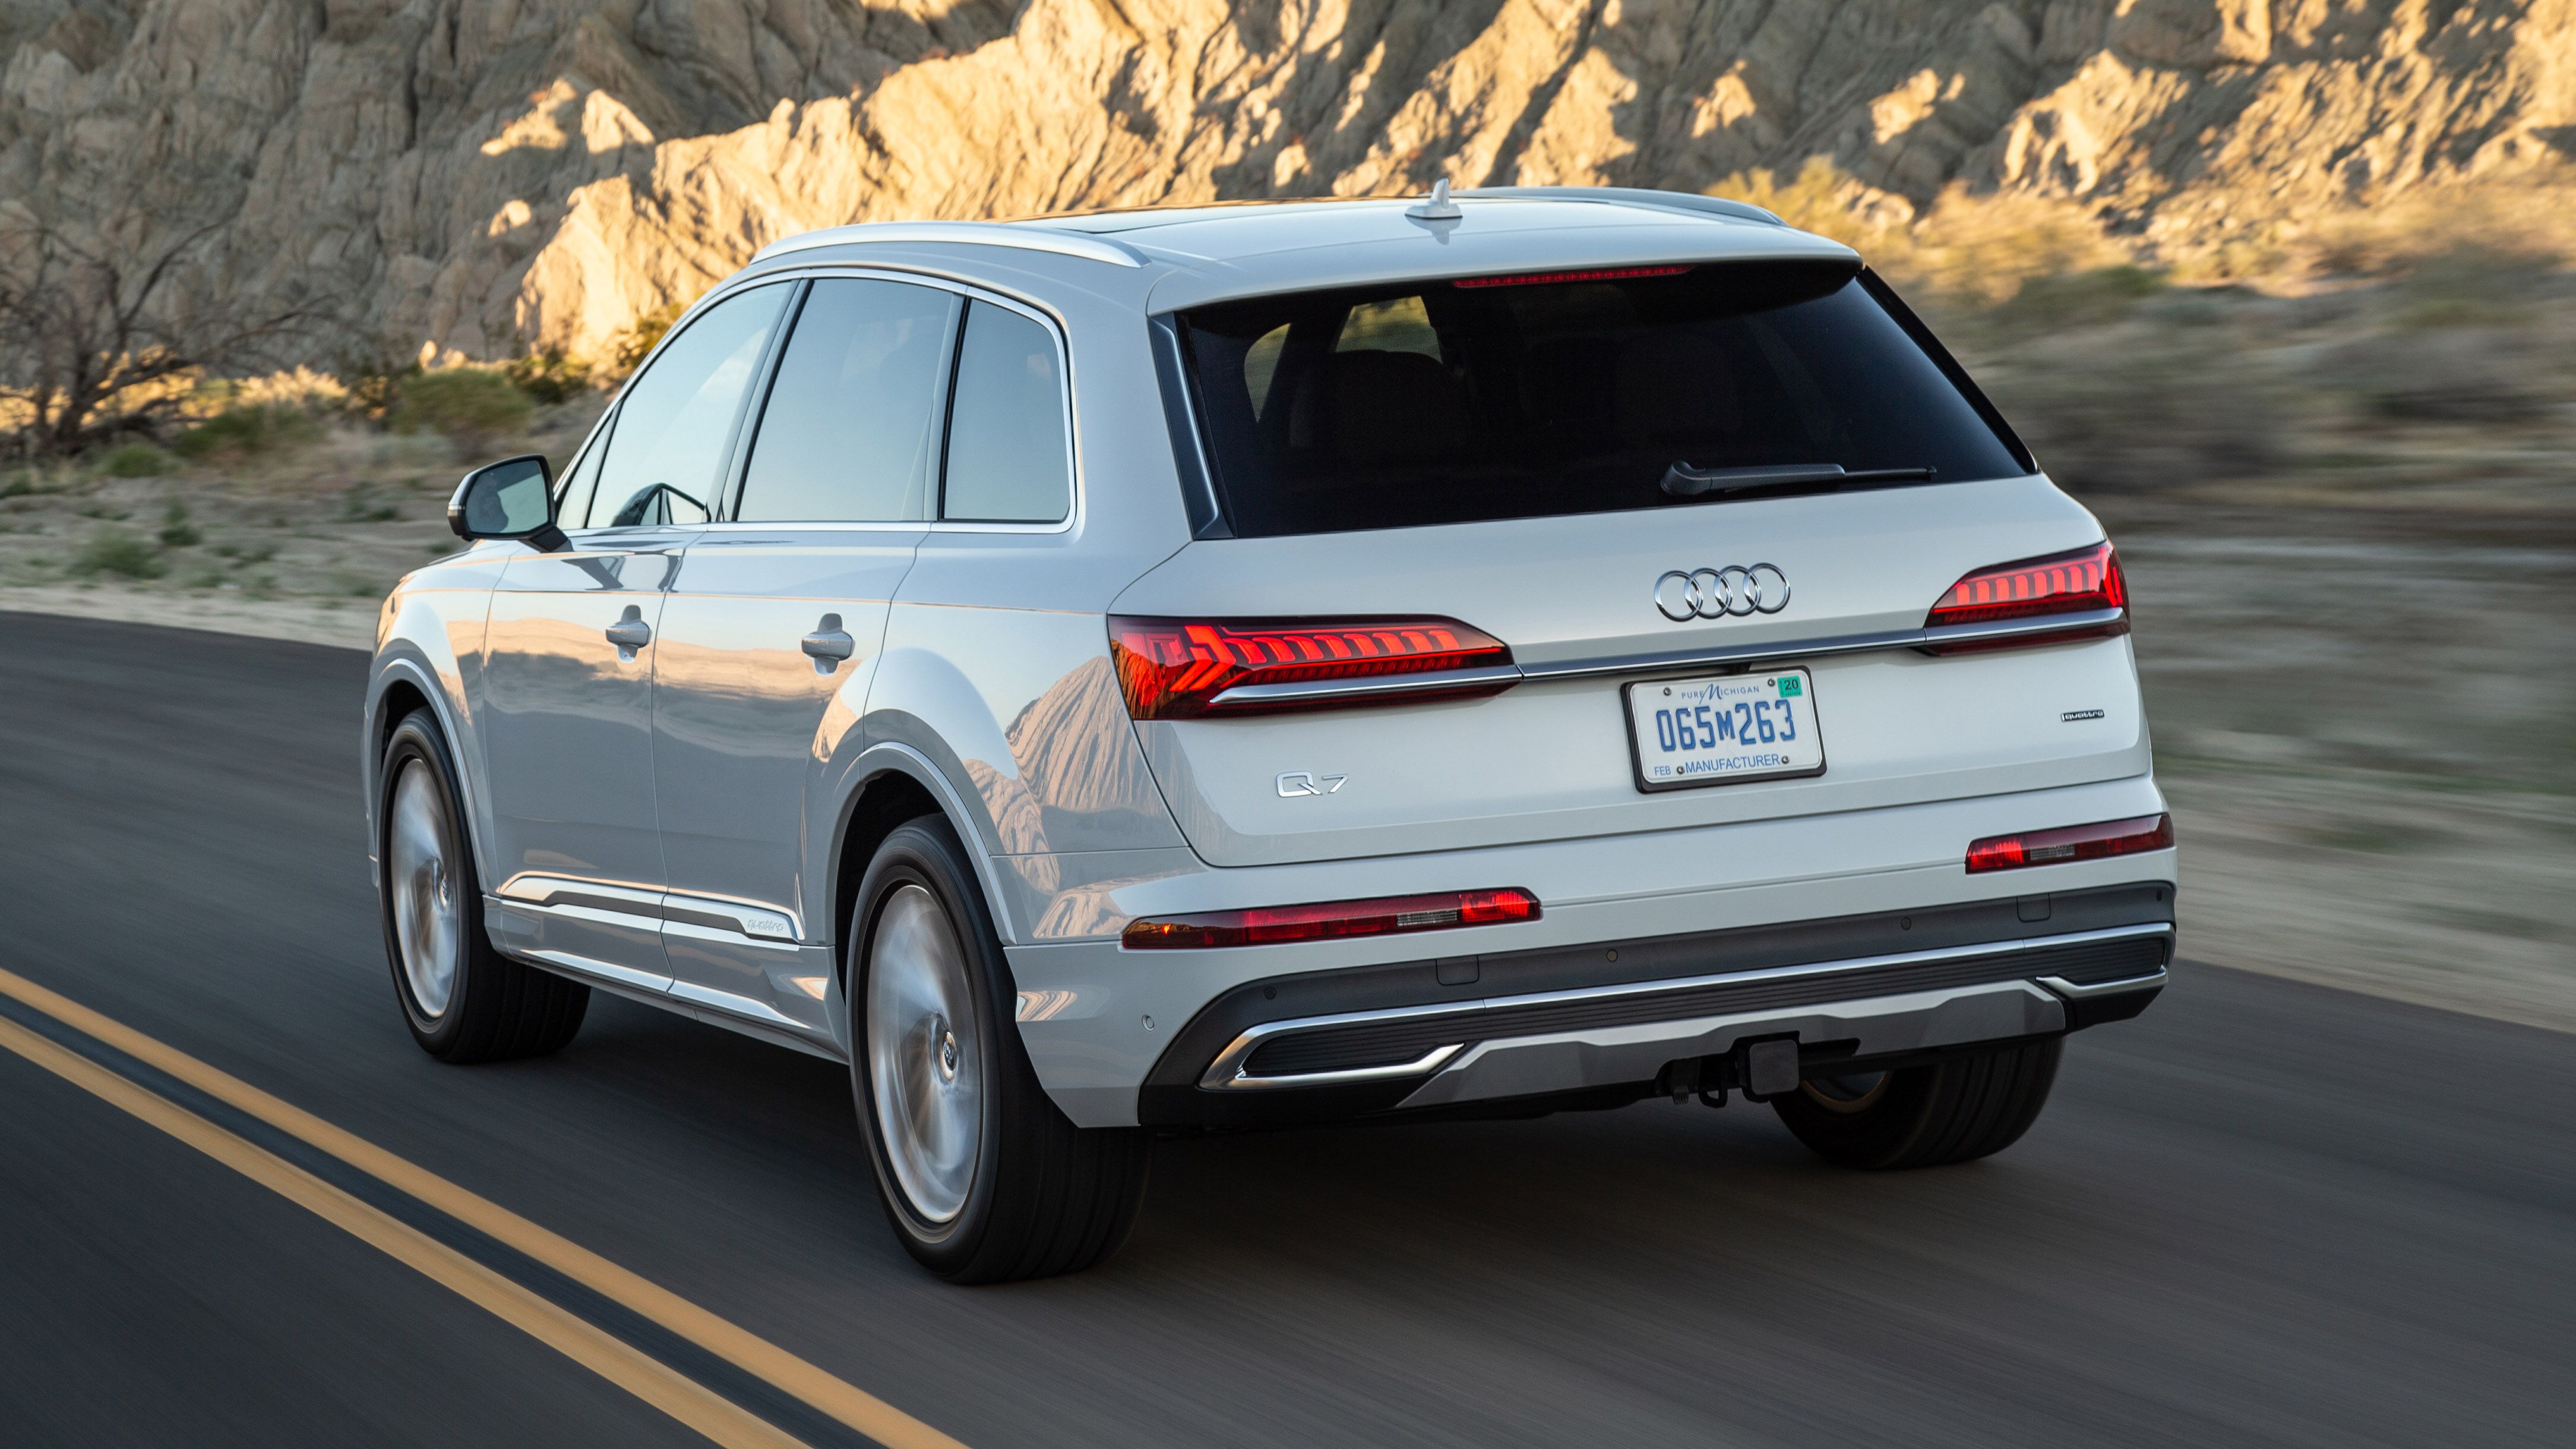 Audi Q7 Review. First drive, what's new, 55 TFSI V fuel